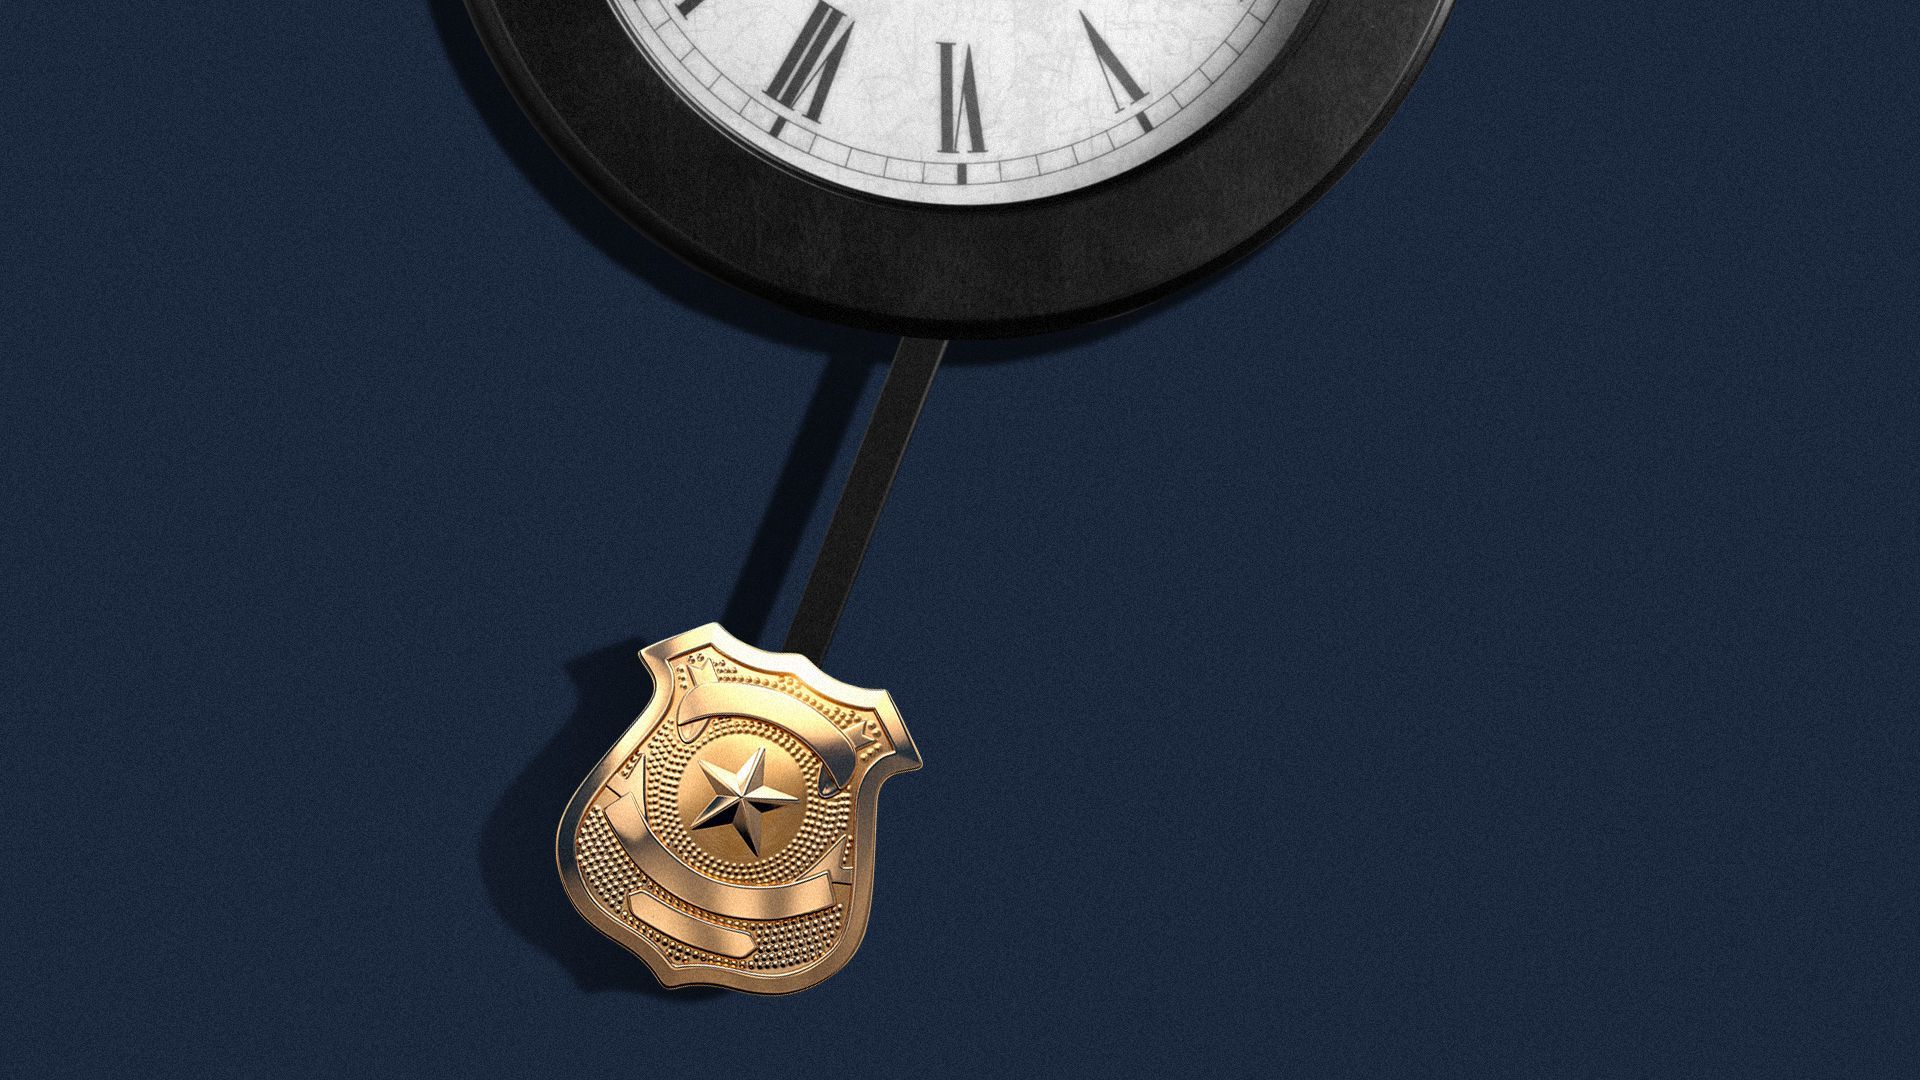 Illustration of police badge on the pendulum of a clock.